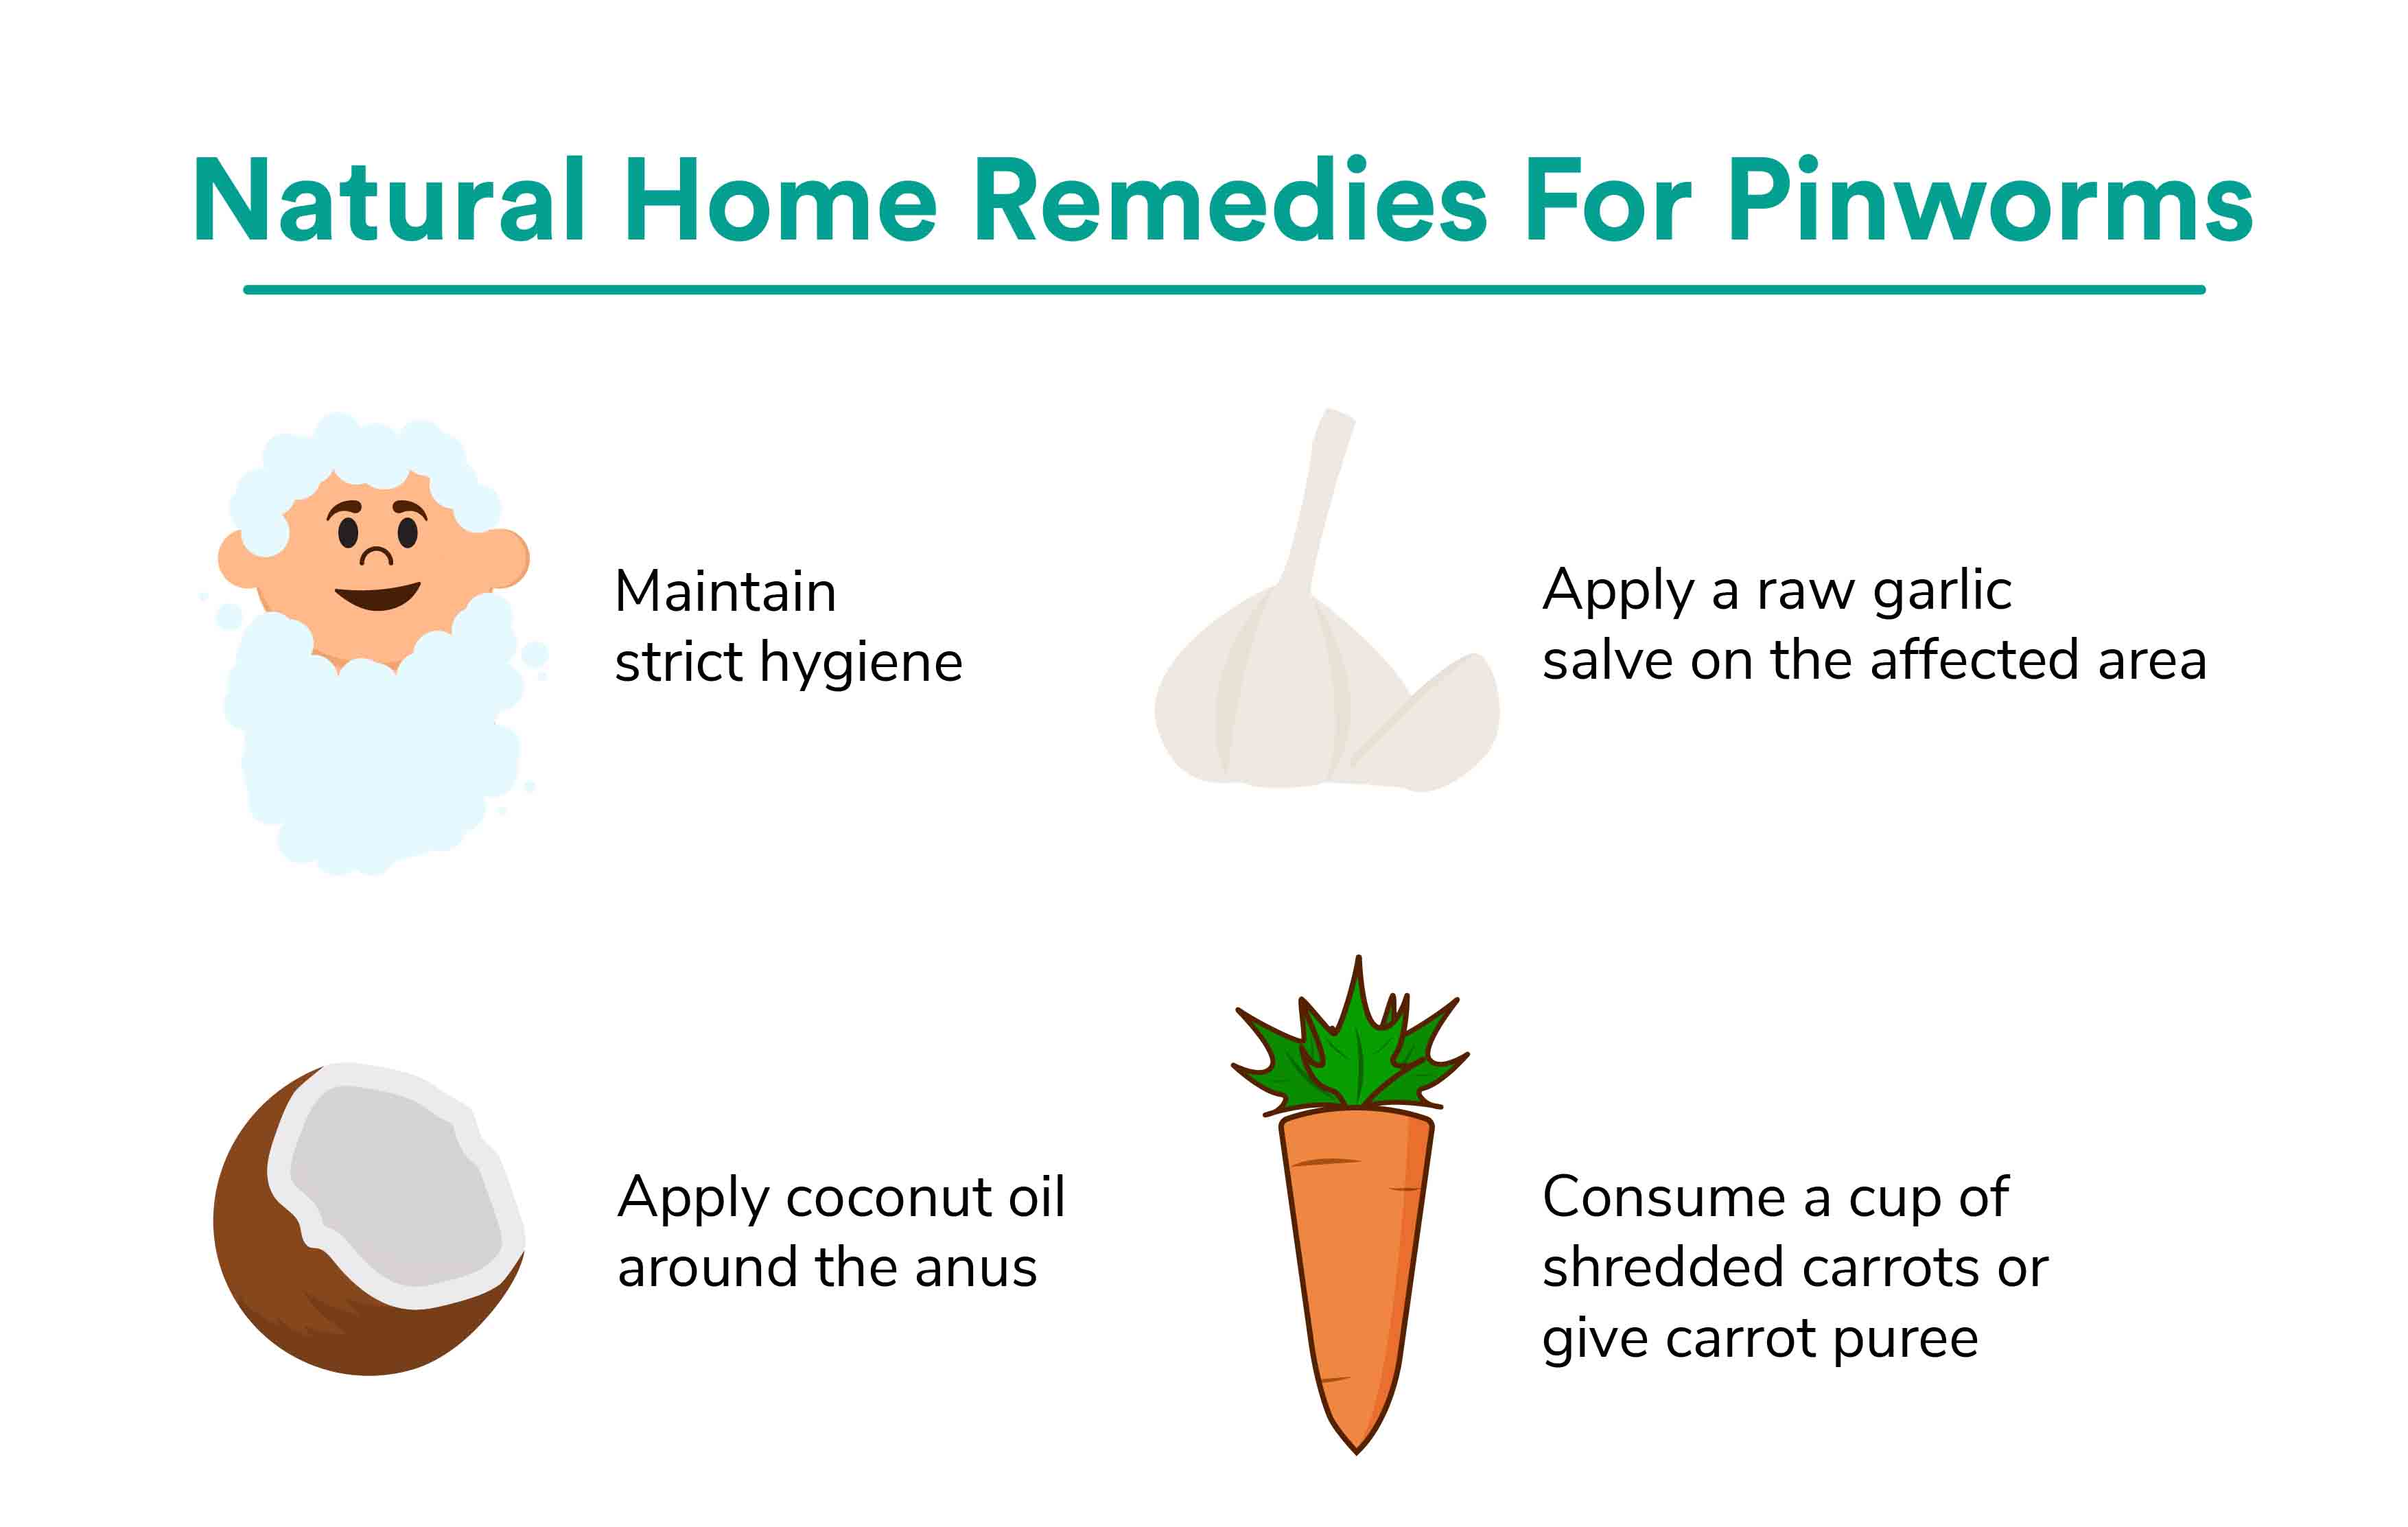 Natural Remedies for Pinworm in babies